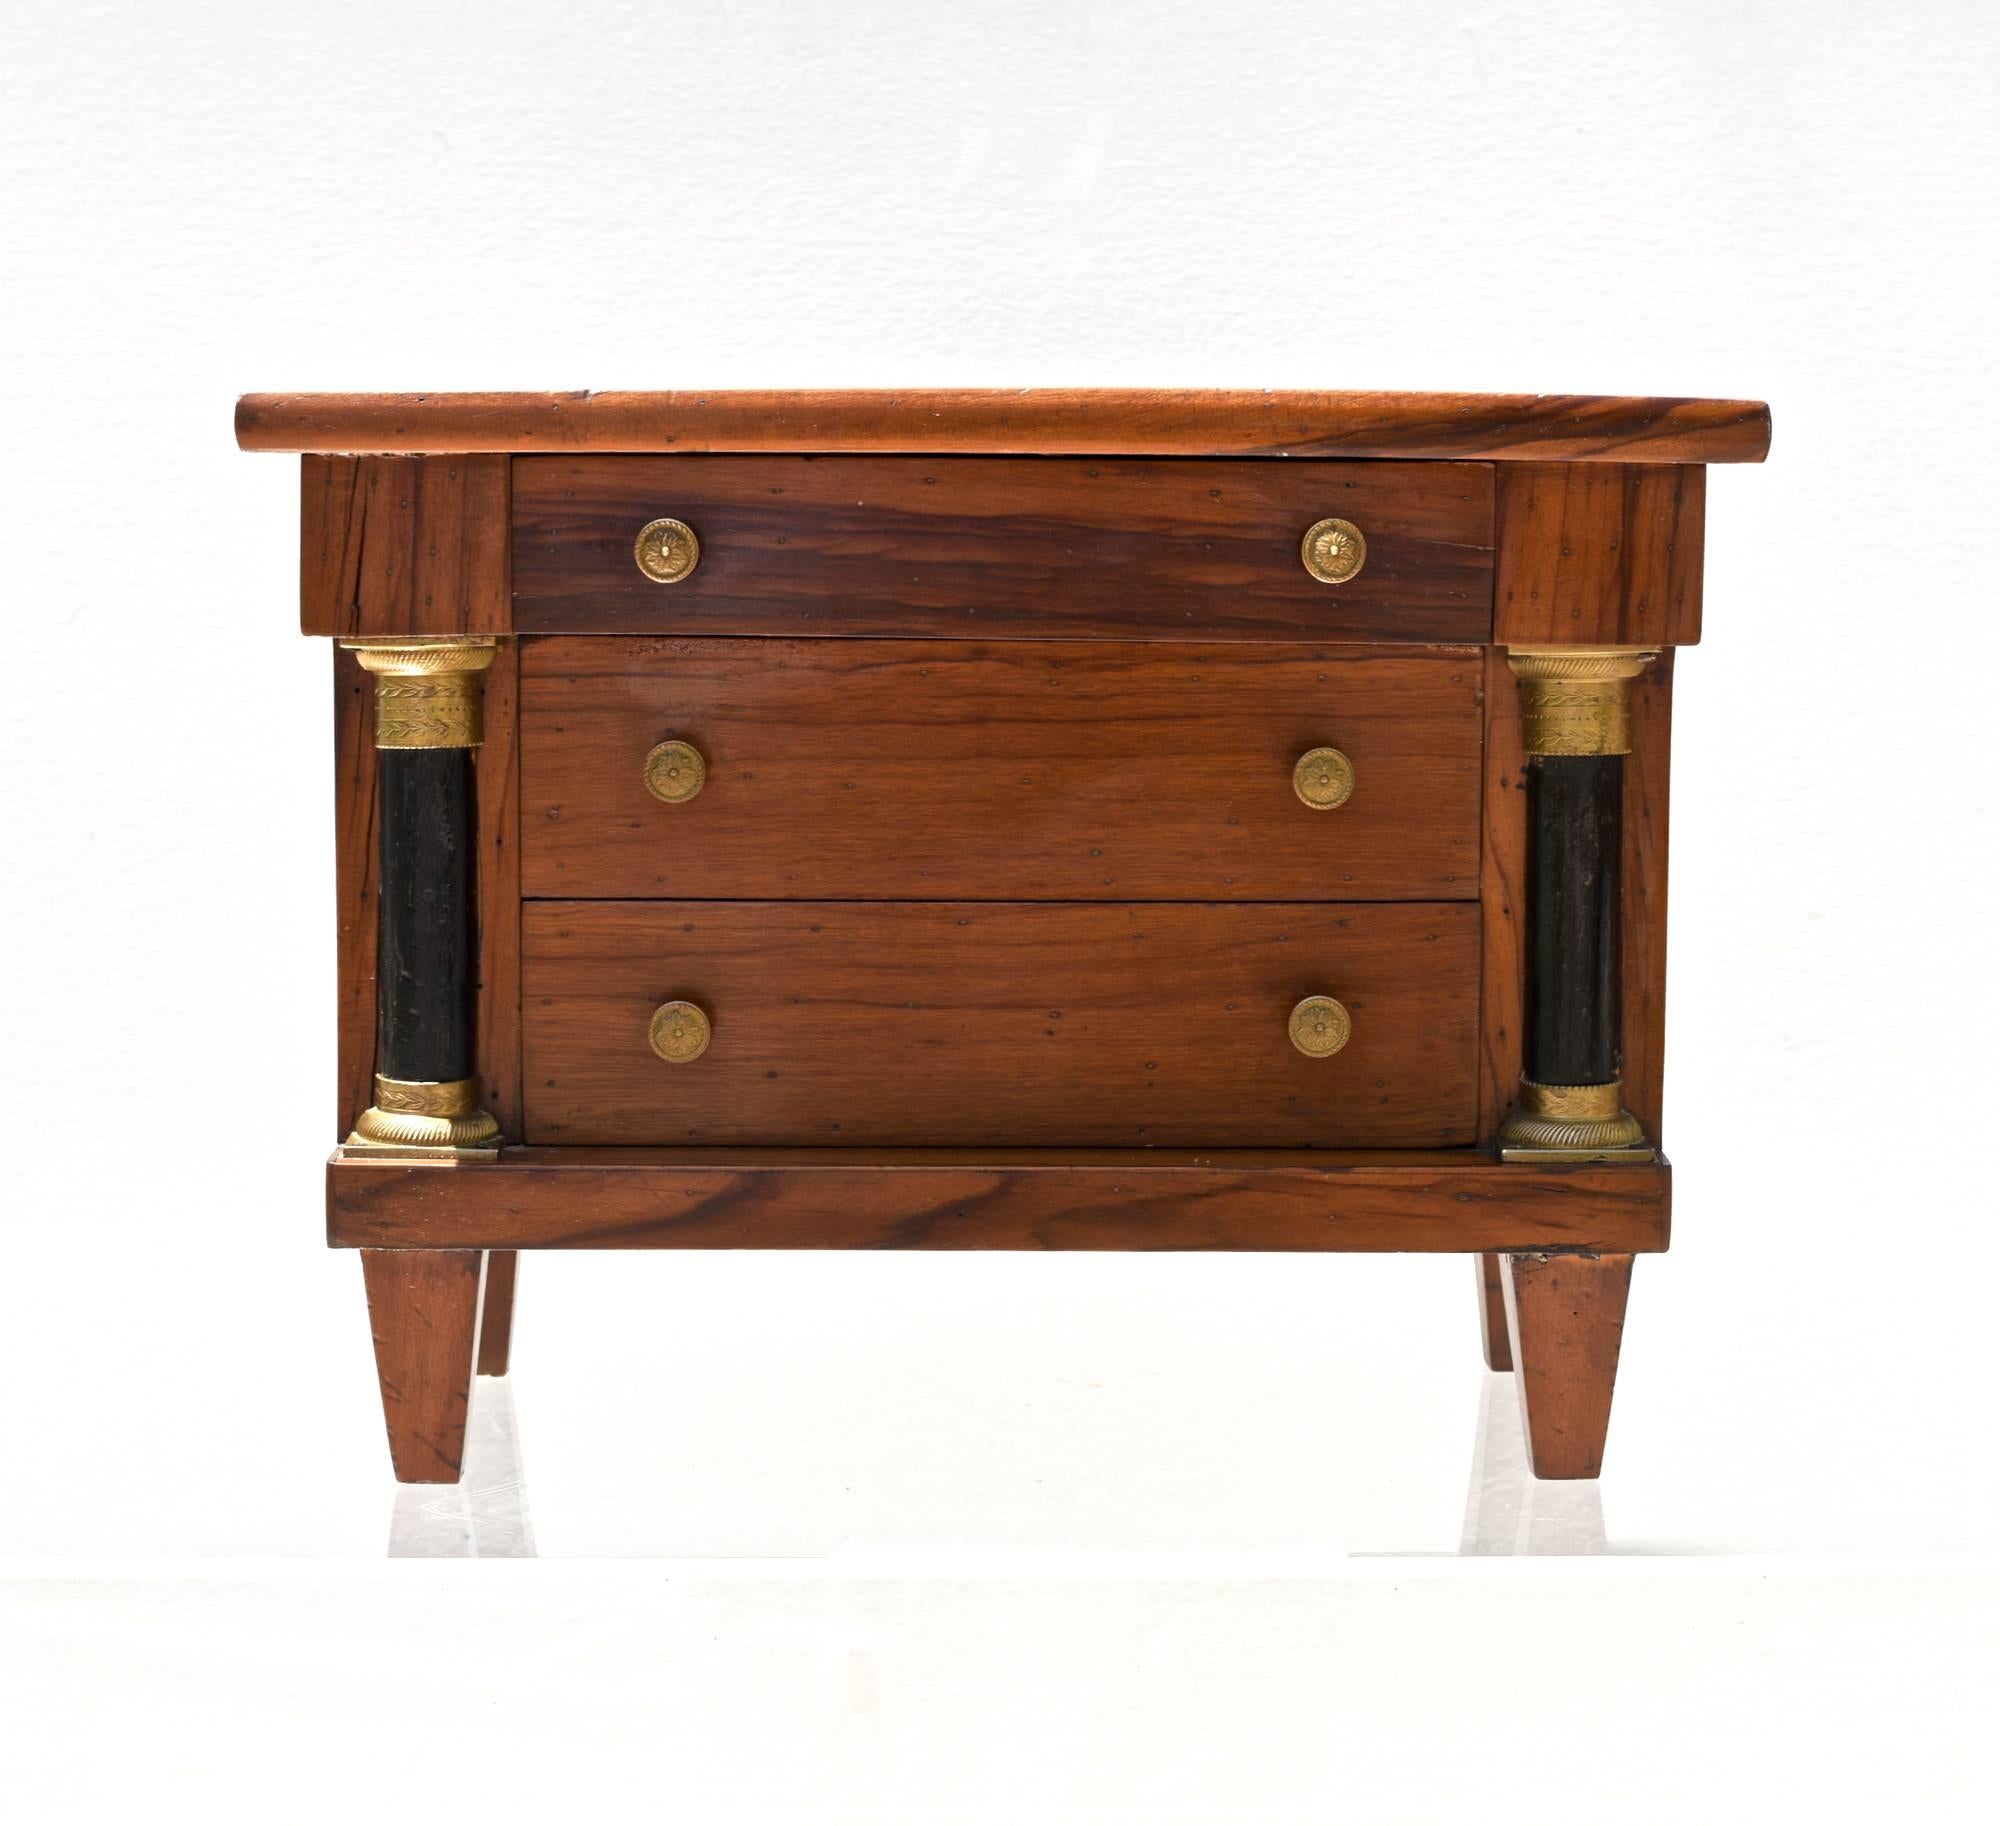 Italian neoclassical tabletop commode of fruitwood. The simple top rest upon three paper lined drawers, flanked by ebonized inset columns and terminates on gently tapering feet. The petite chest of drawers will make for stylish storage of everyday